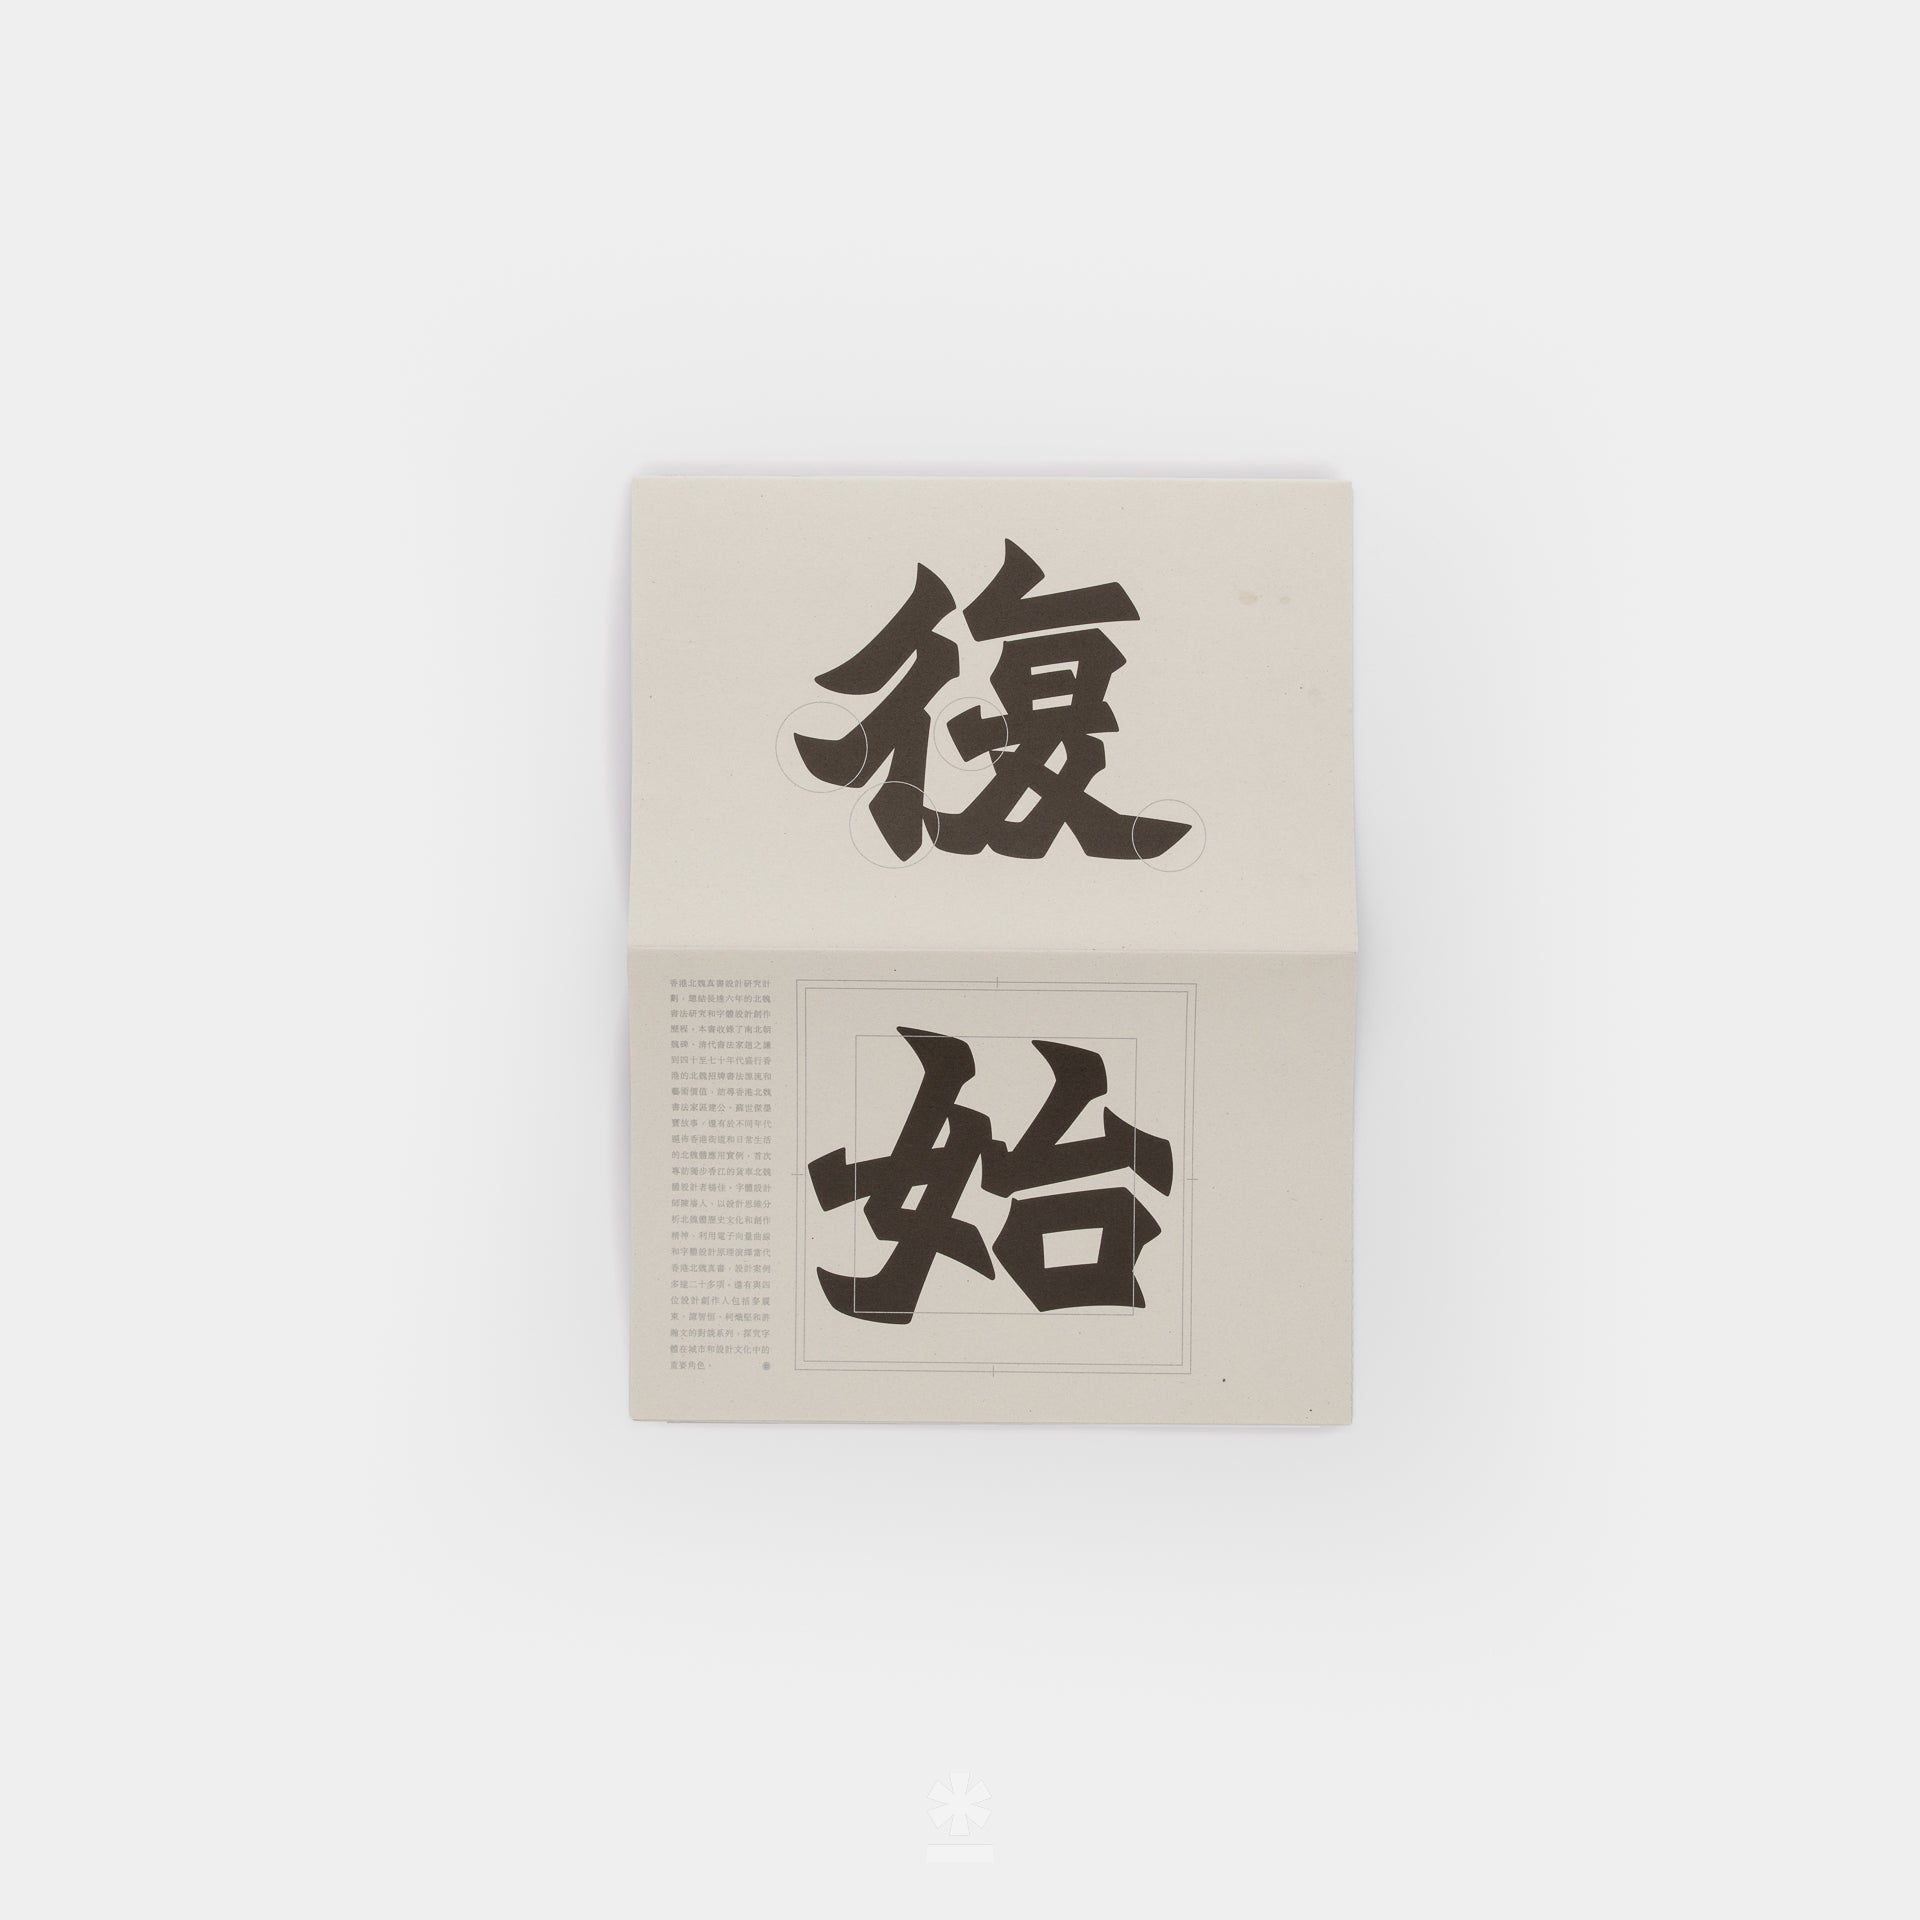 A Study on Hong Kong Beiwei Calligraphy and Type Design (香港北魏真書)